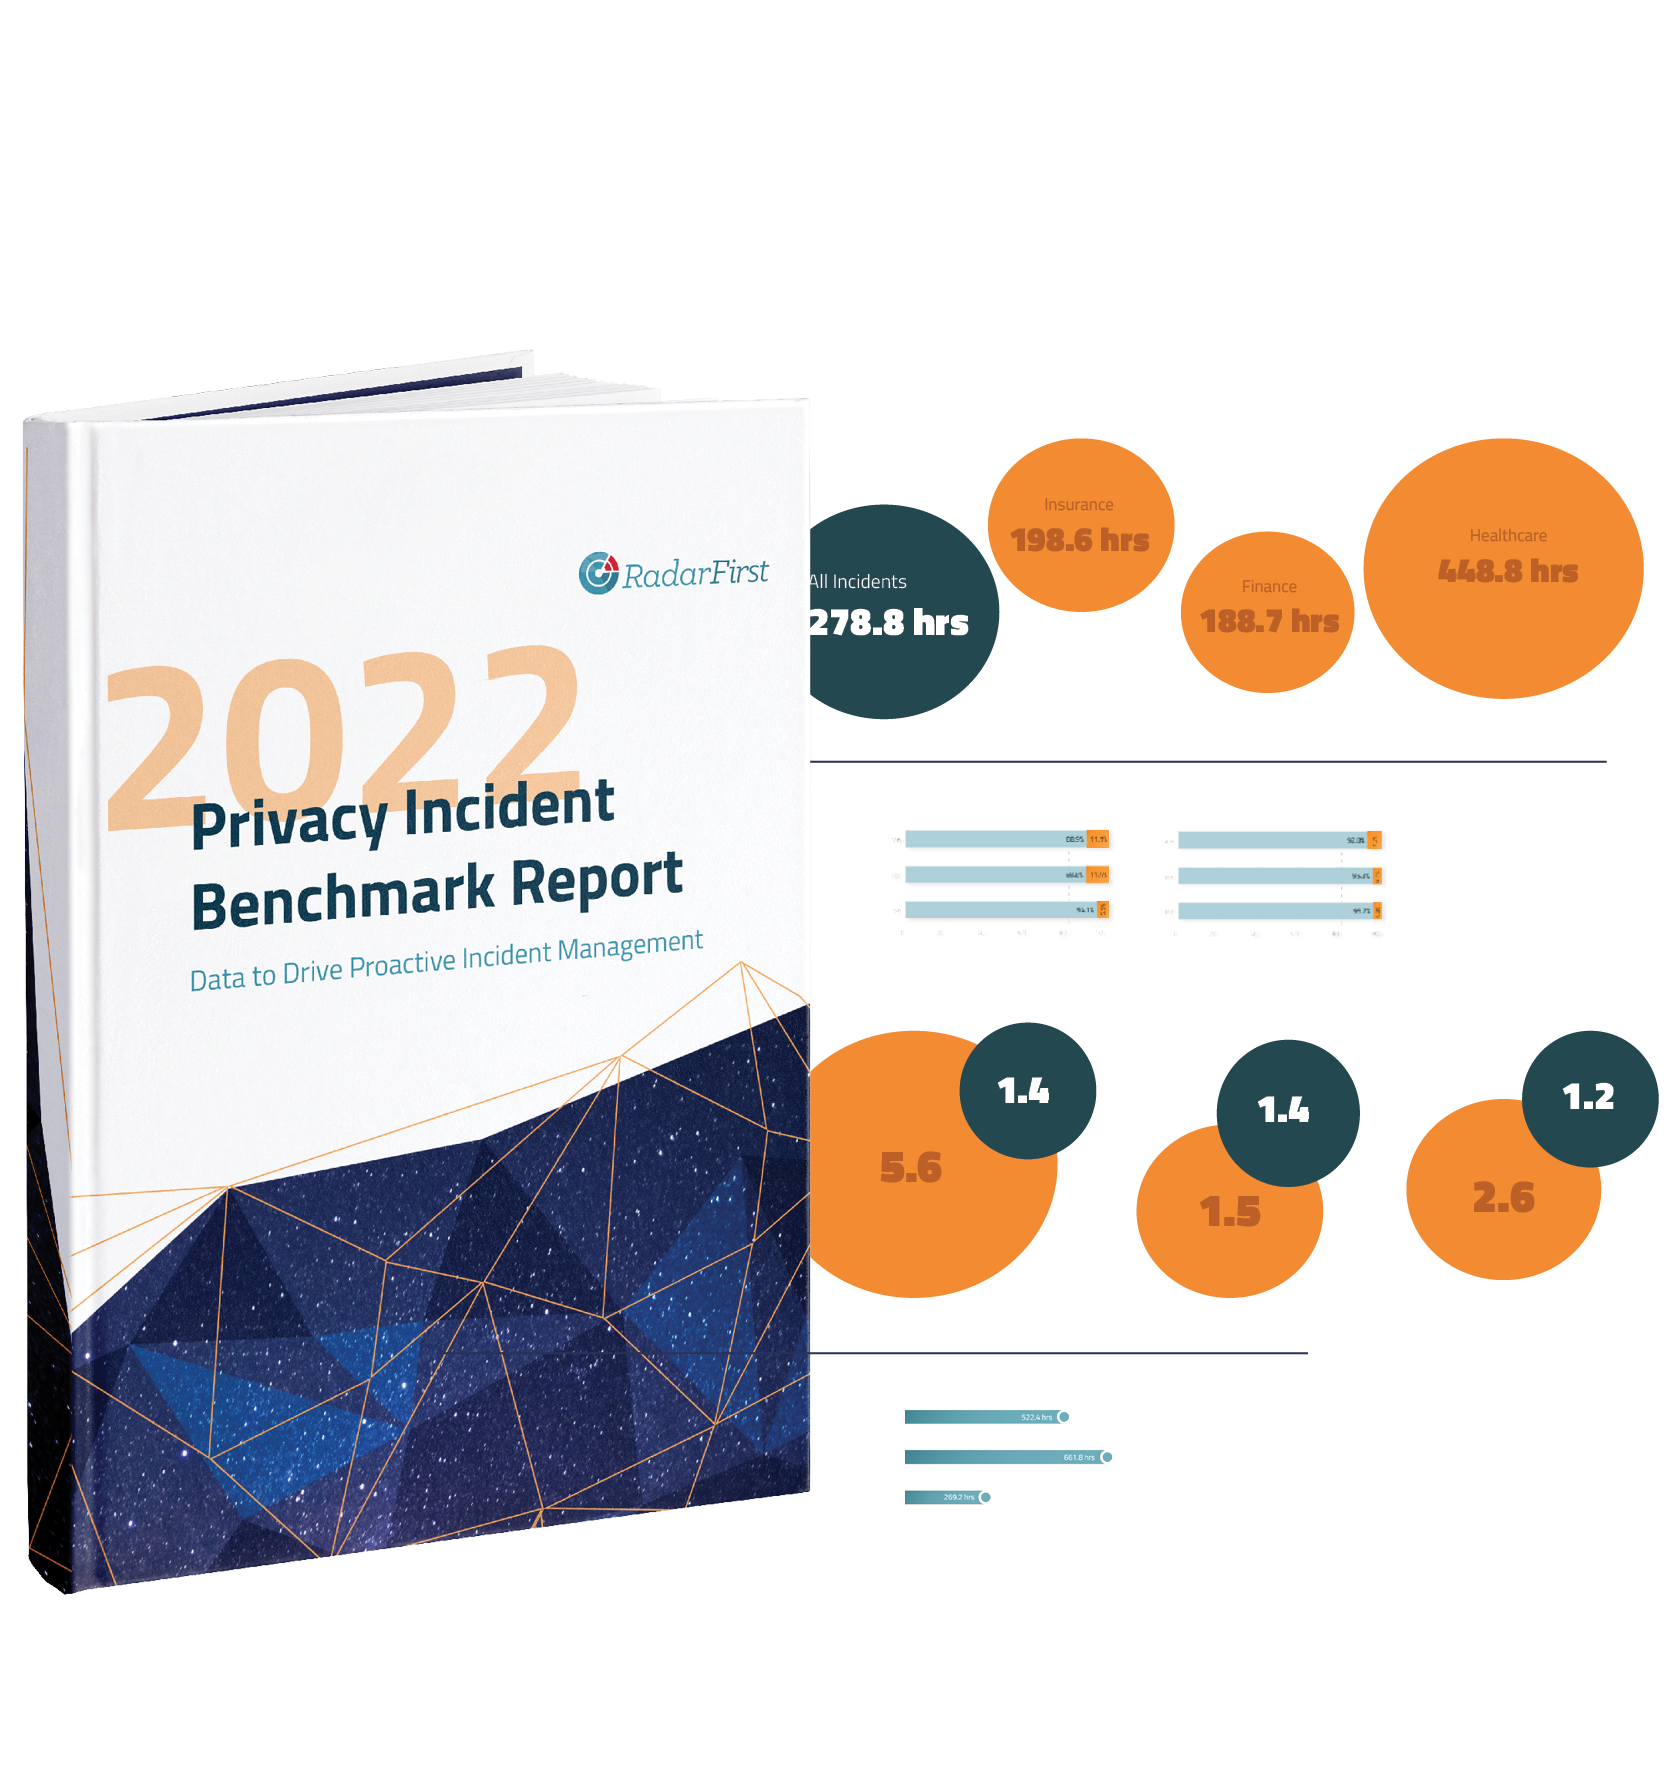 2022 Privacy Incident Benchmark Report | RadarFirst